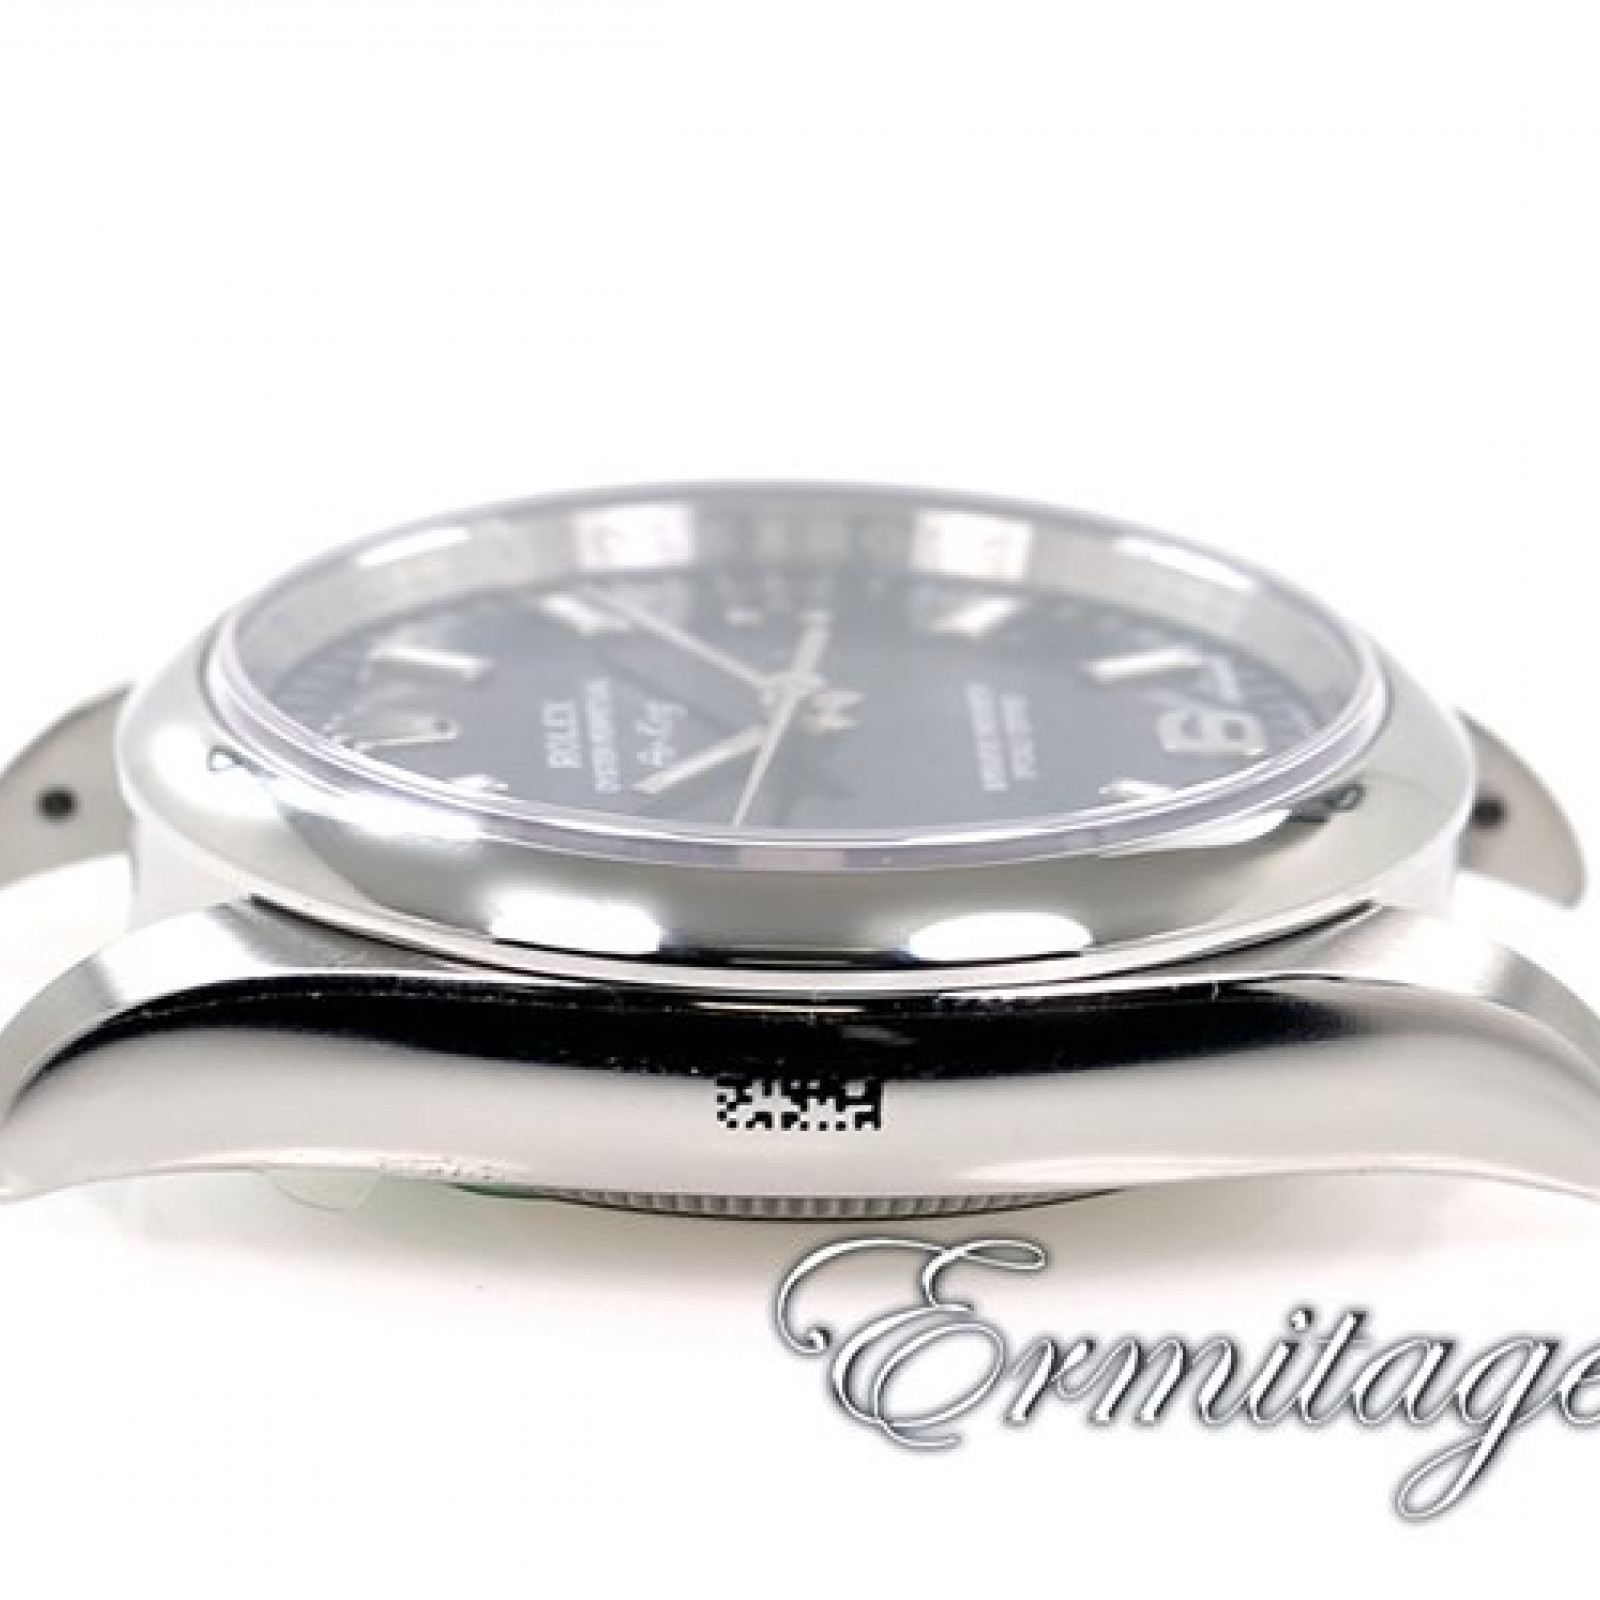 Steel on Oyster Rolex Air King 114200 34 mm